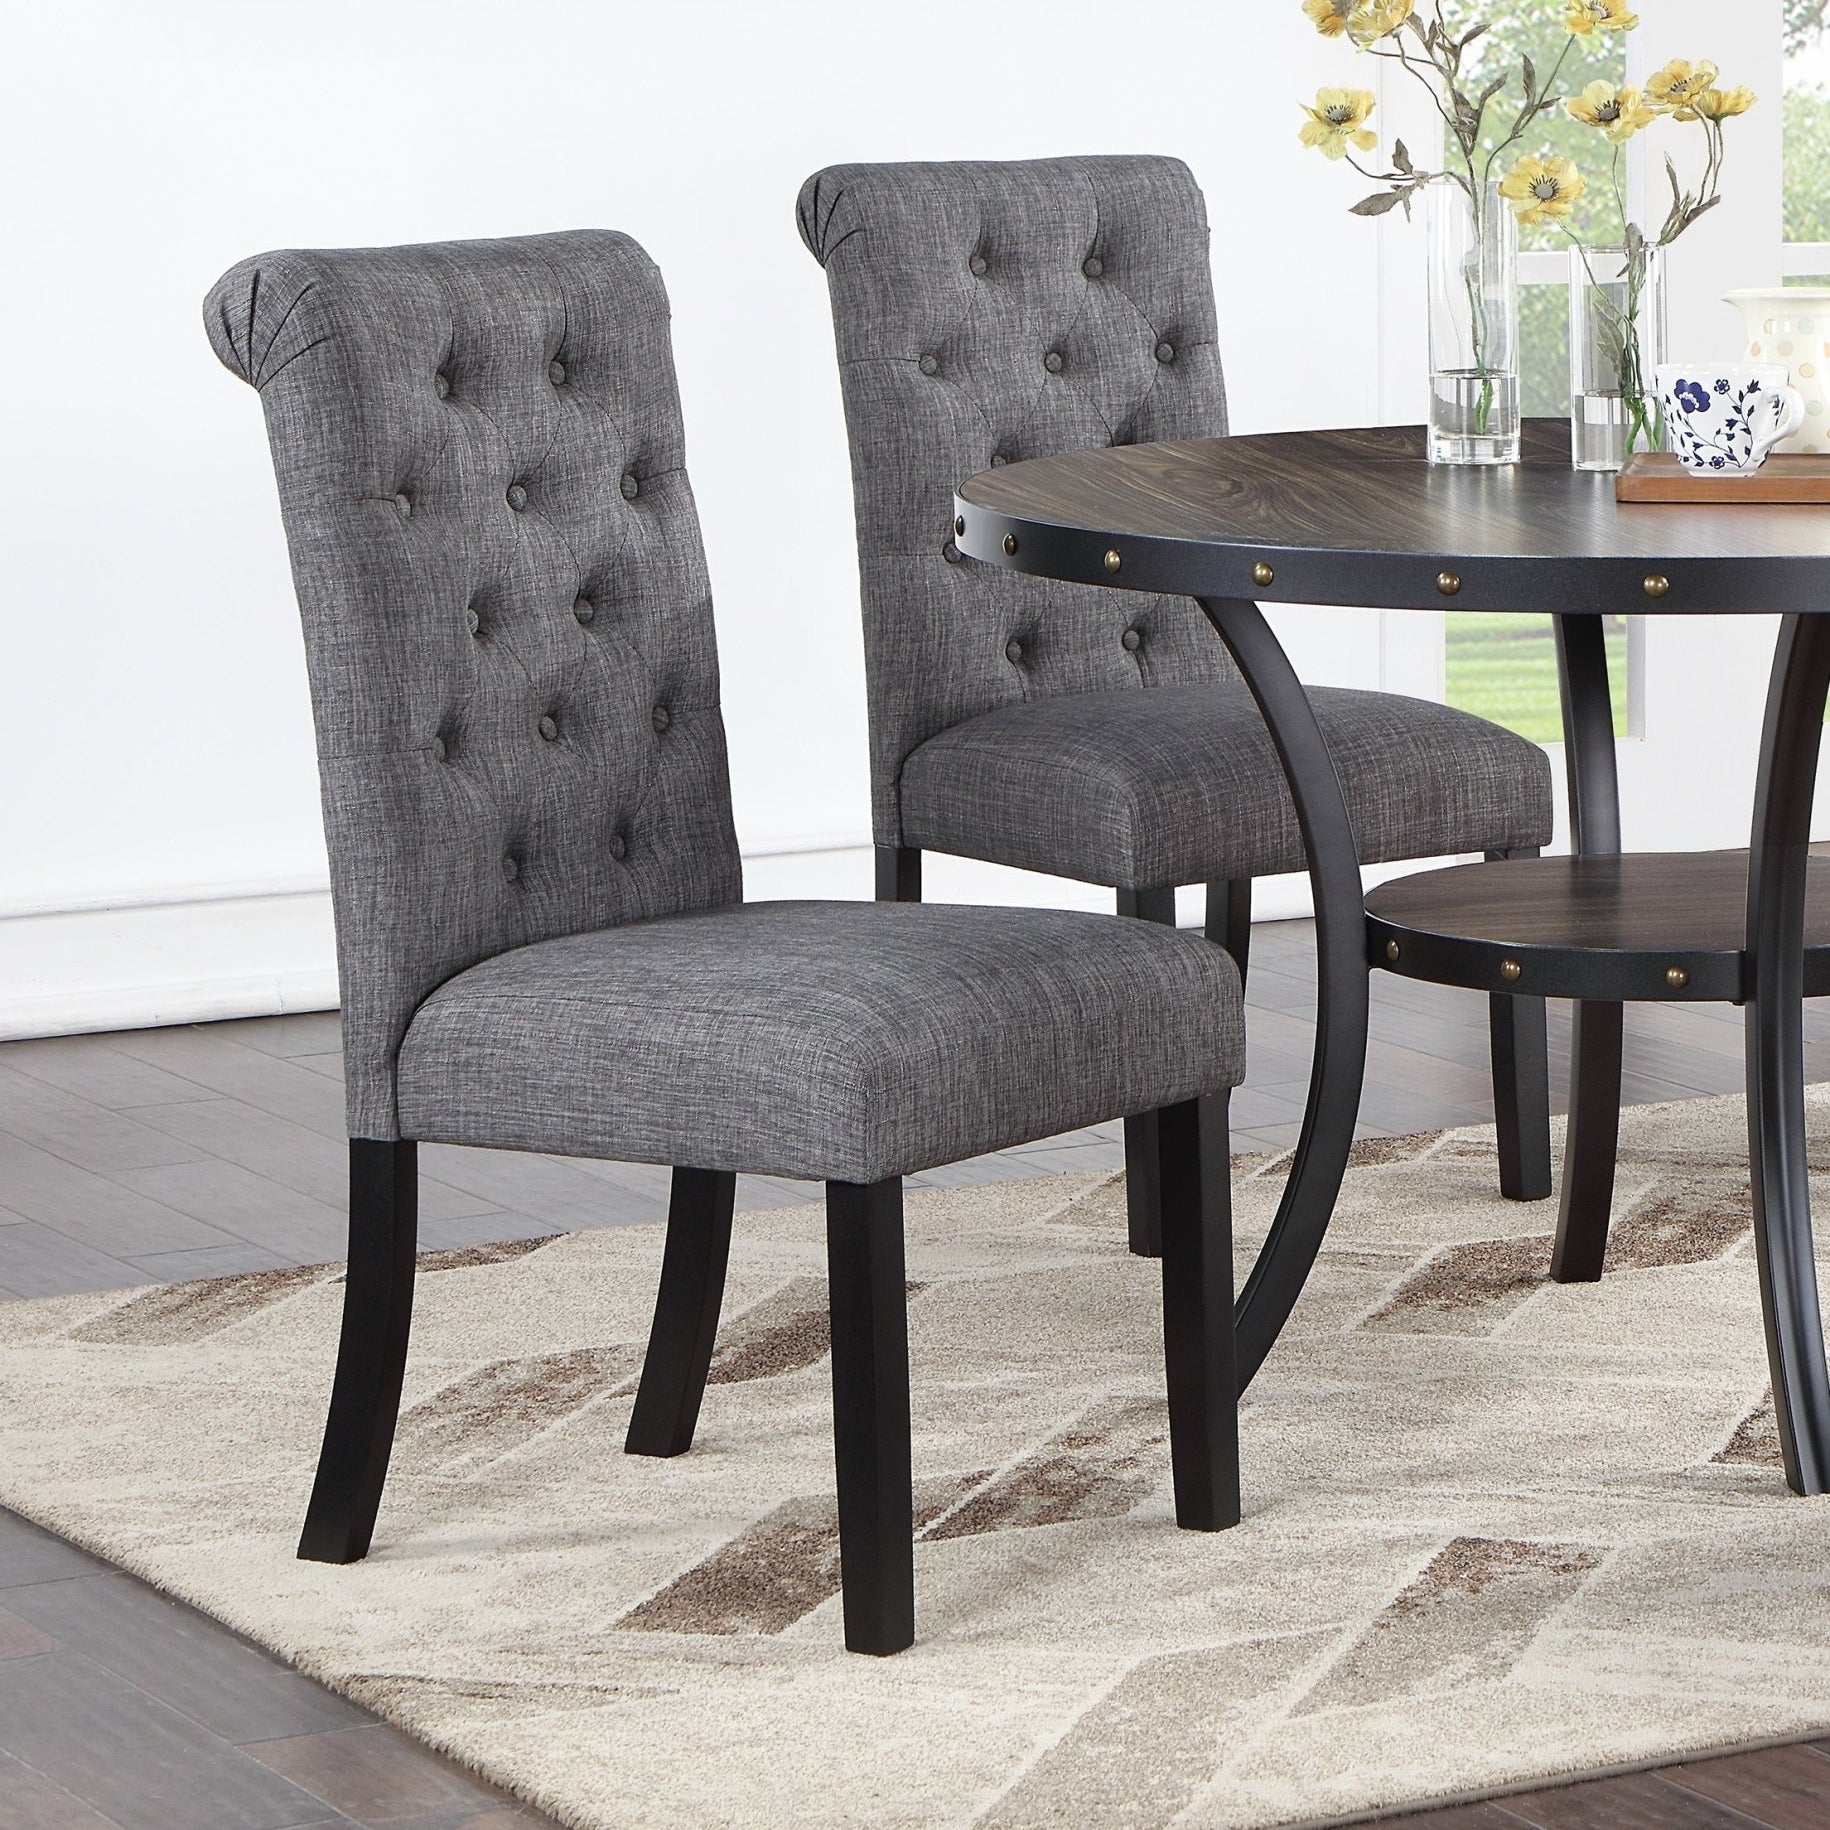 5 Piece Dining Table Set with 4 Side Chairs, Tufted upholstered - Pier 1